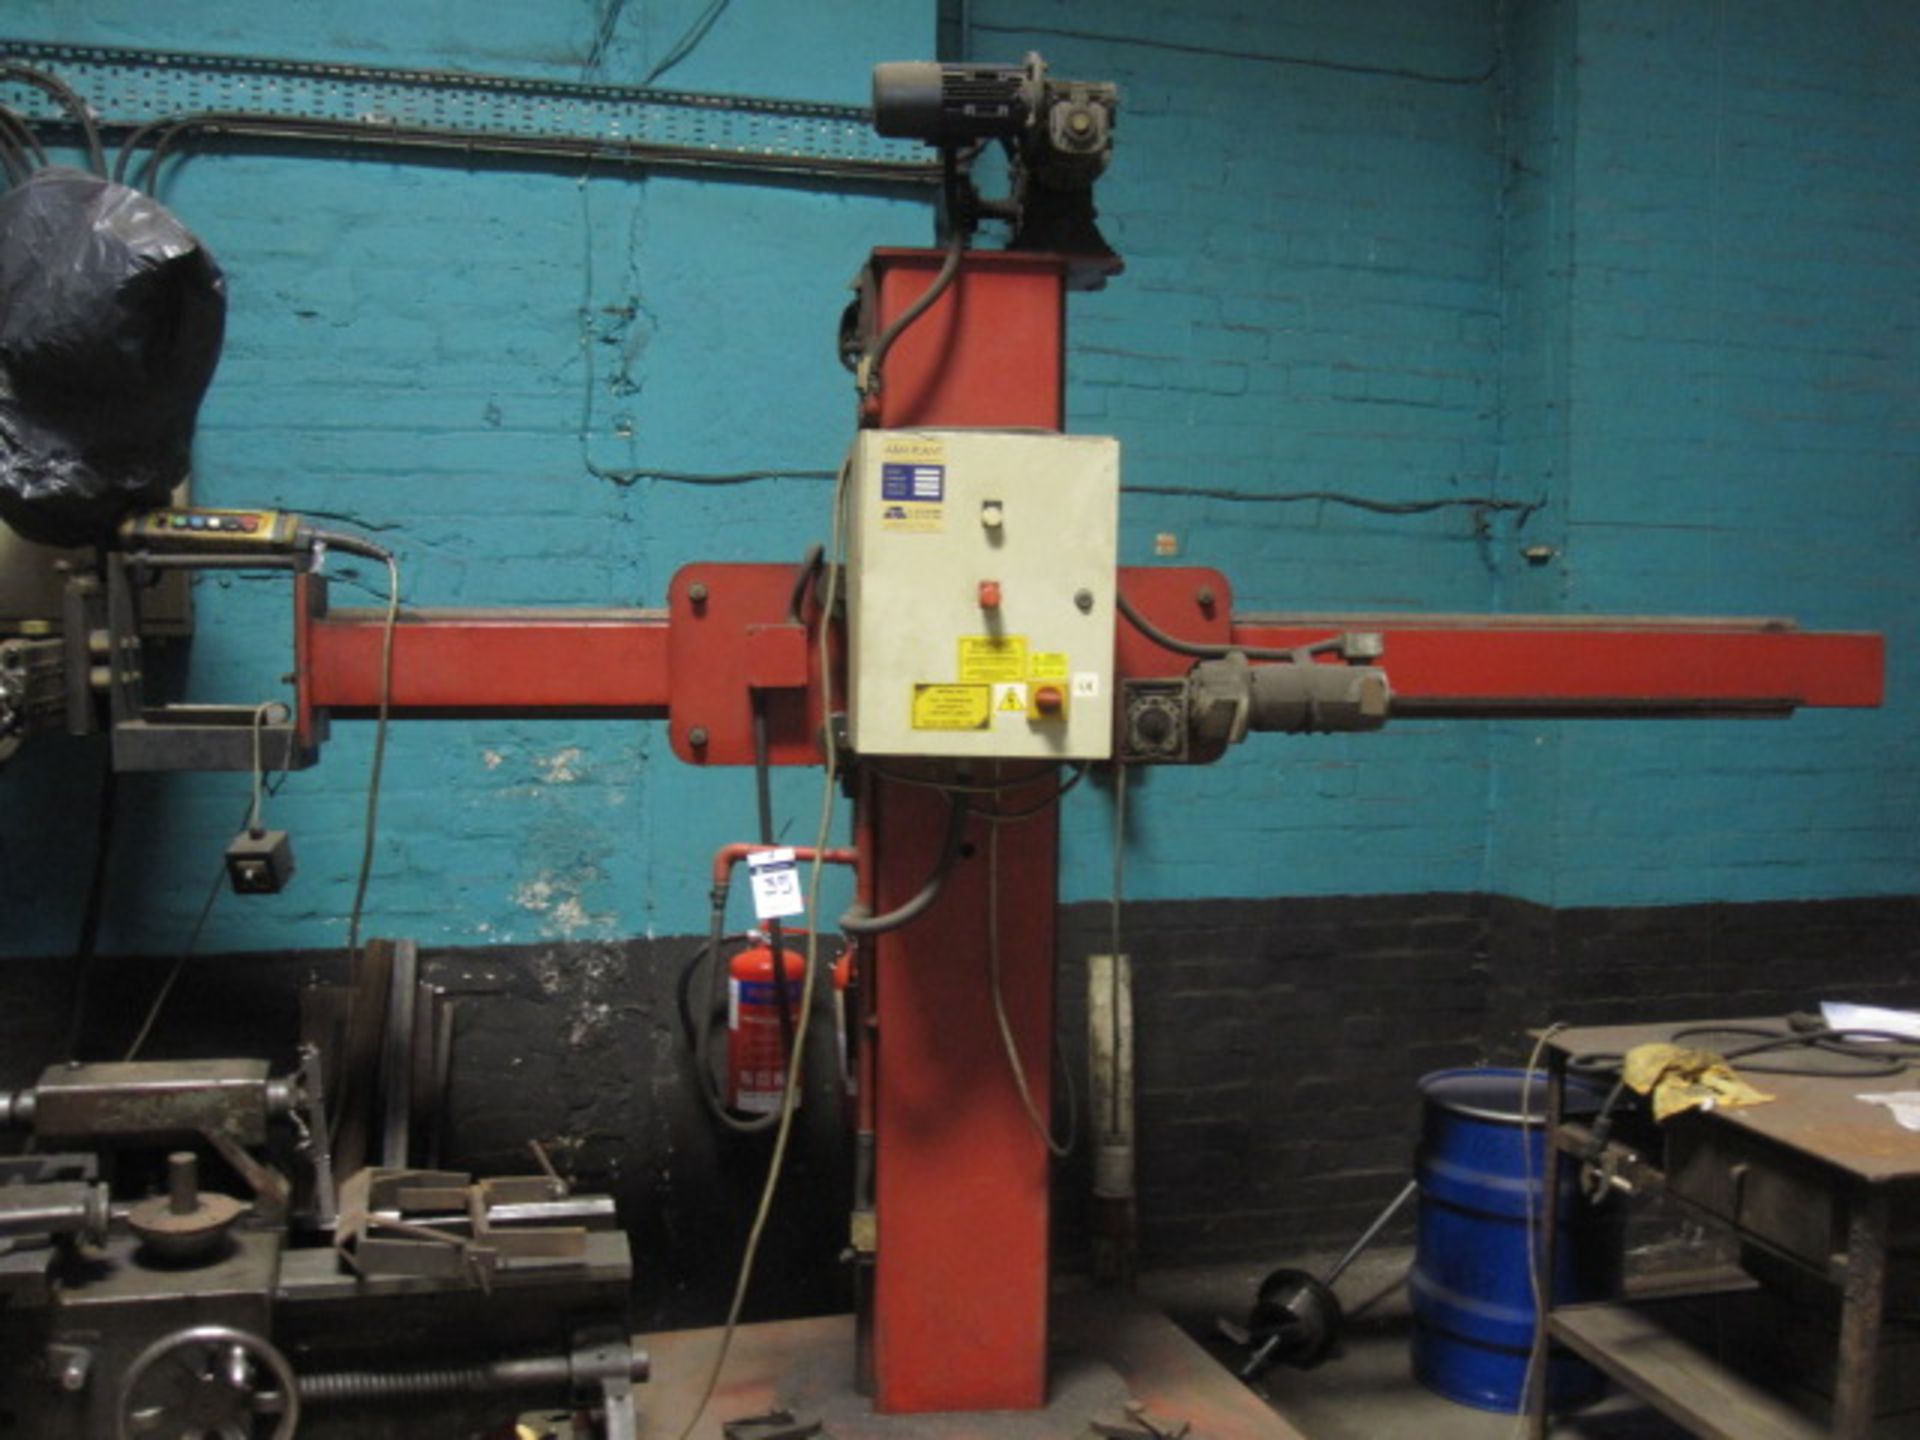 A&N PLANT sub-arc welder together with ESAB Model LAD 800 welding power source.  Note: We understand